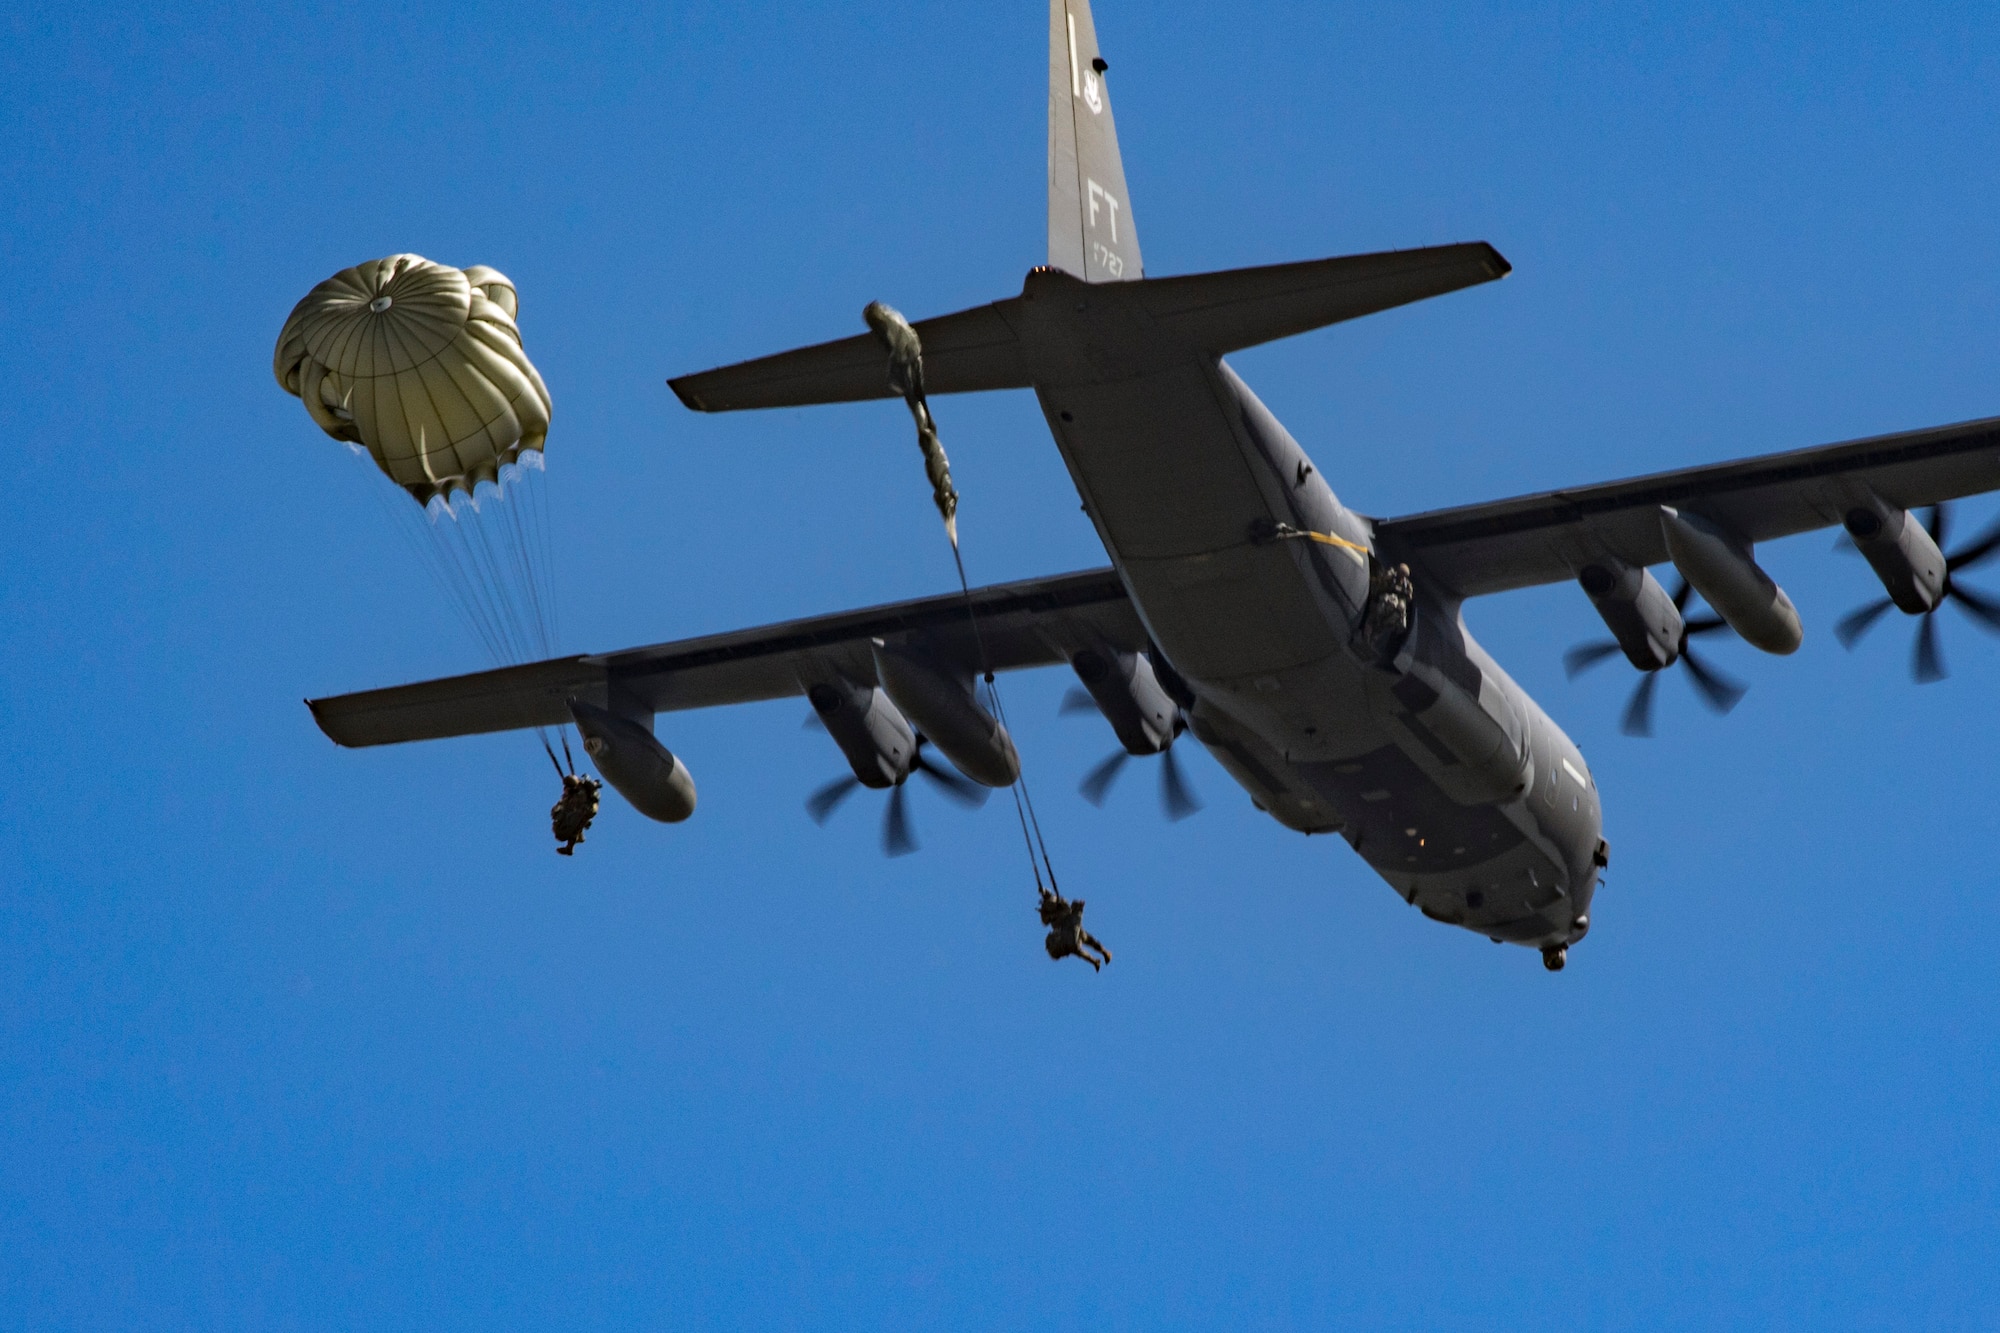 Members of the 820th Base Defense Group exit an HC-130J Combat King II during a static-line jump, Oct. 3, 2017, at the Lee Fulp drop zone in Tifton, Ga. During a static-line jump, the jumper is attached to the aircraft via the ‘static-line’, which automatically deploys the jumpers’ parachute after they’ve exited the aircraft. (U.S. Air Force photo by Airman 1st Class Daniel Snider)